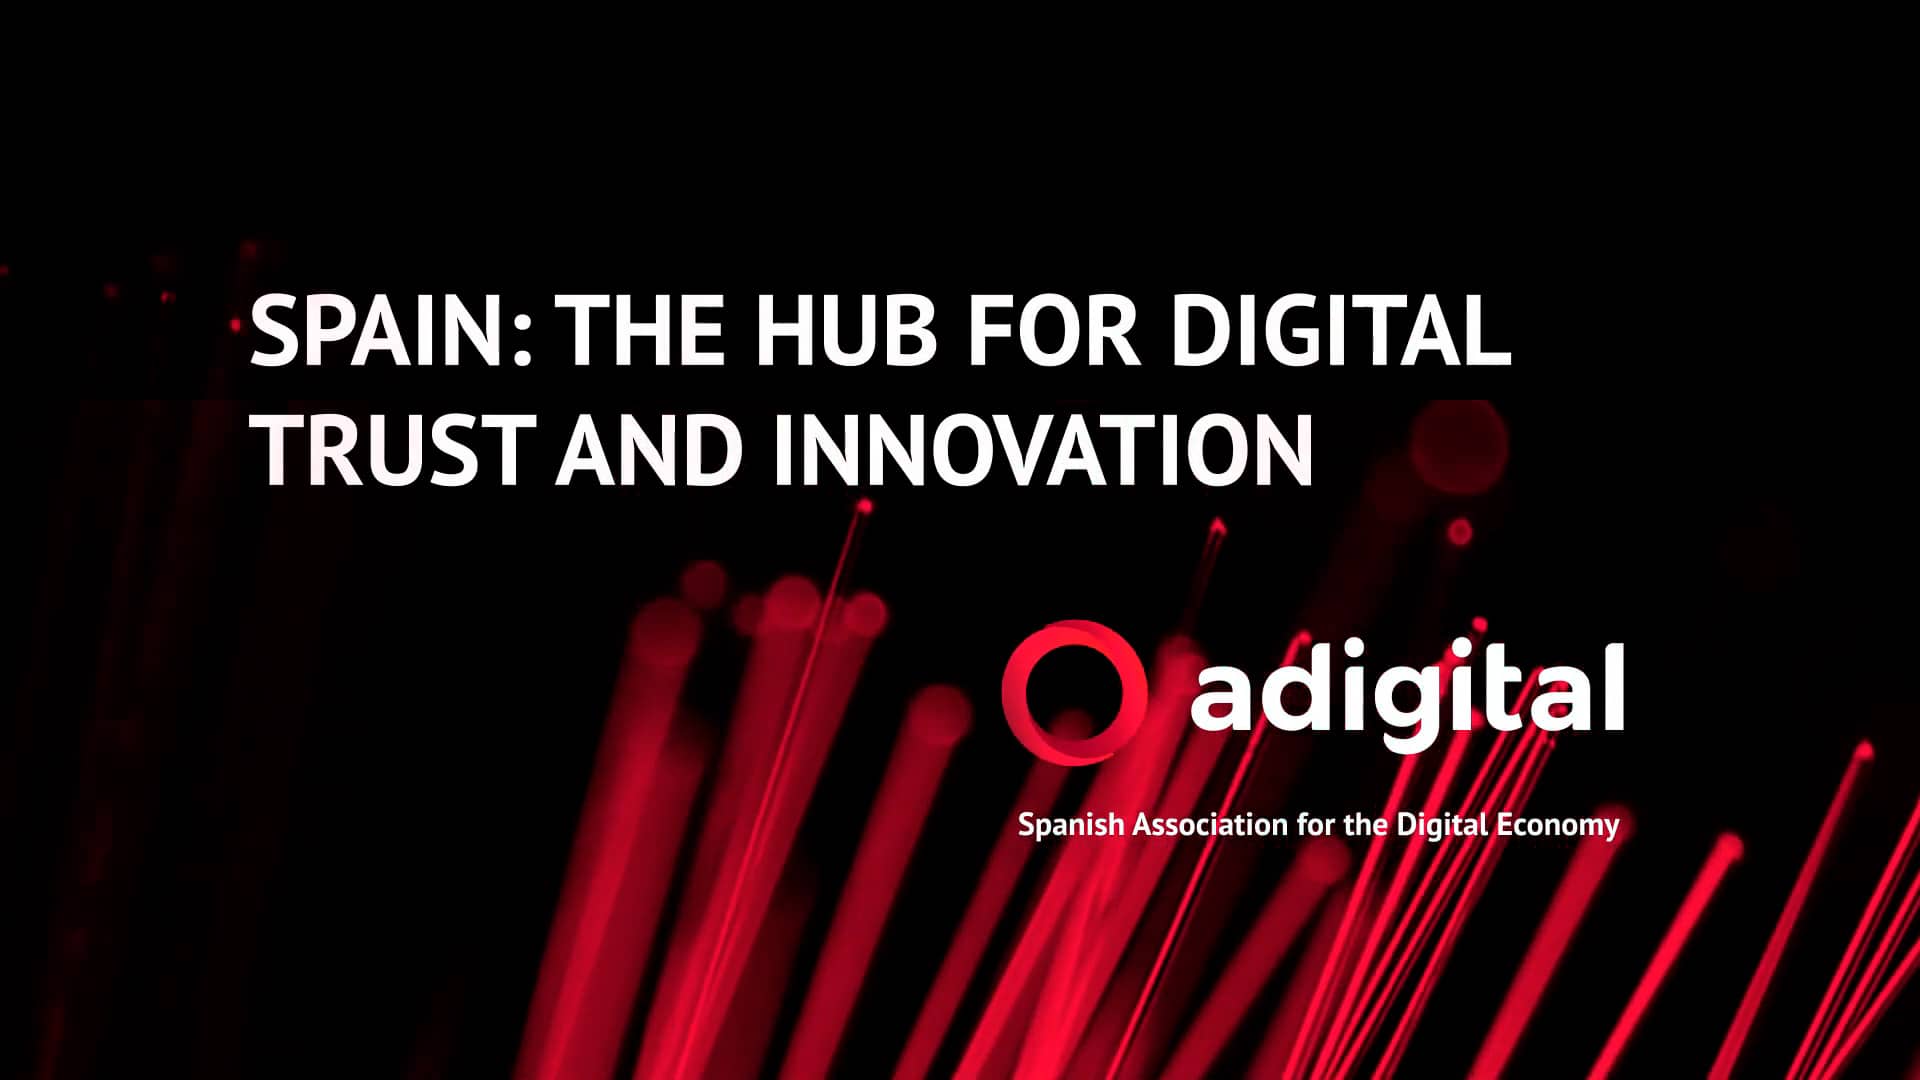 Spain: the hub for digital trust and innovation